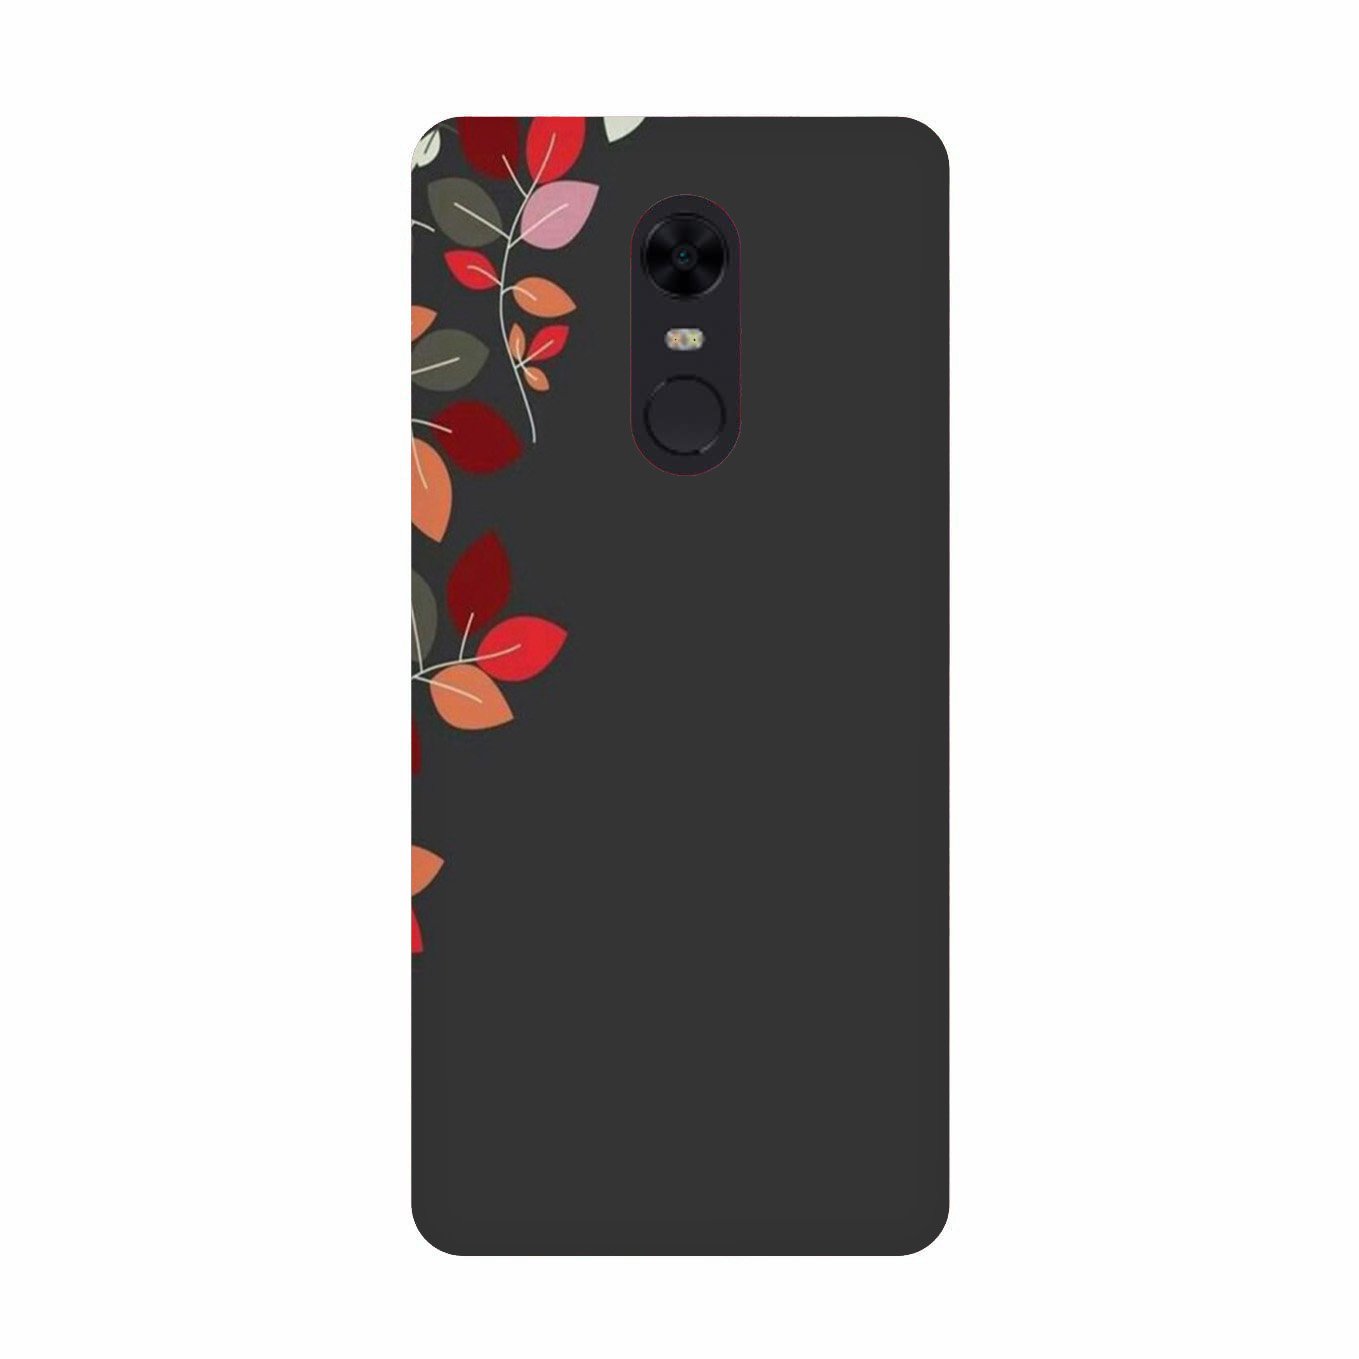 Grey Background Case for Redmi Note 5